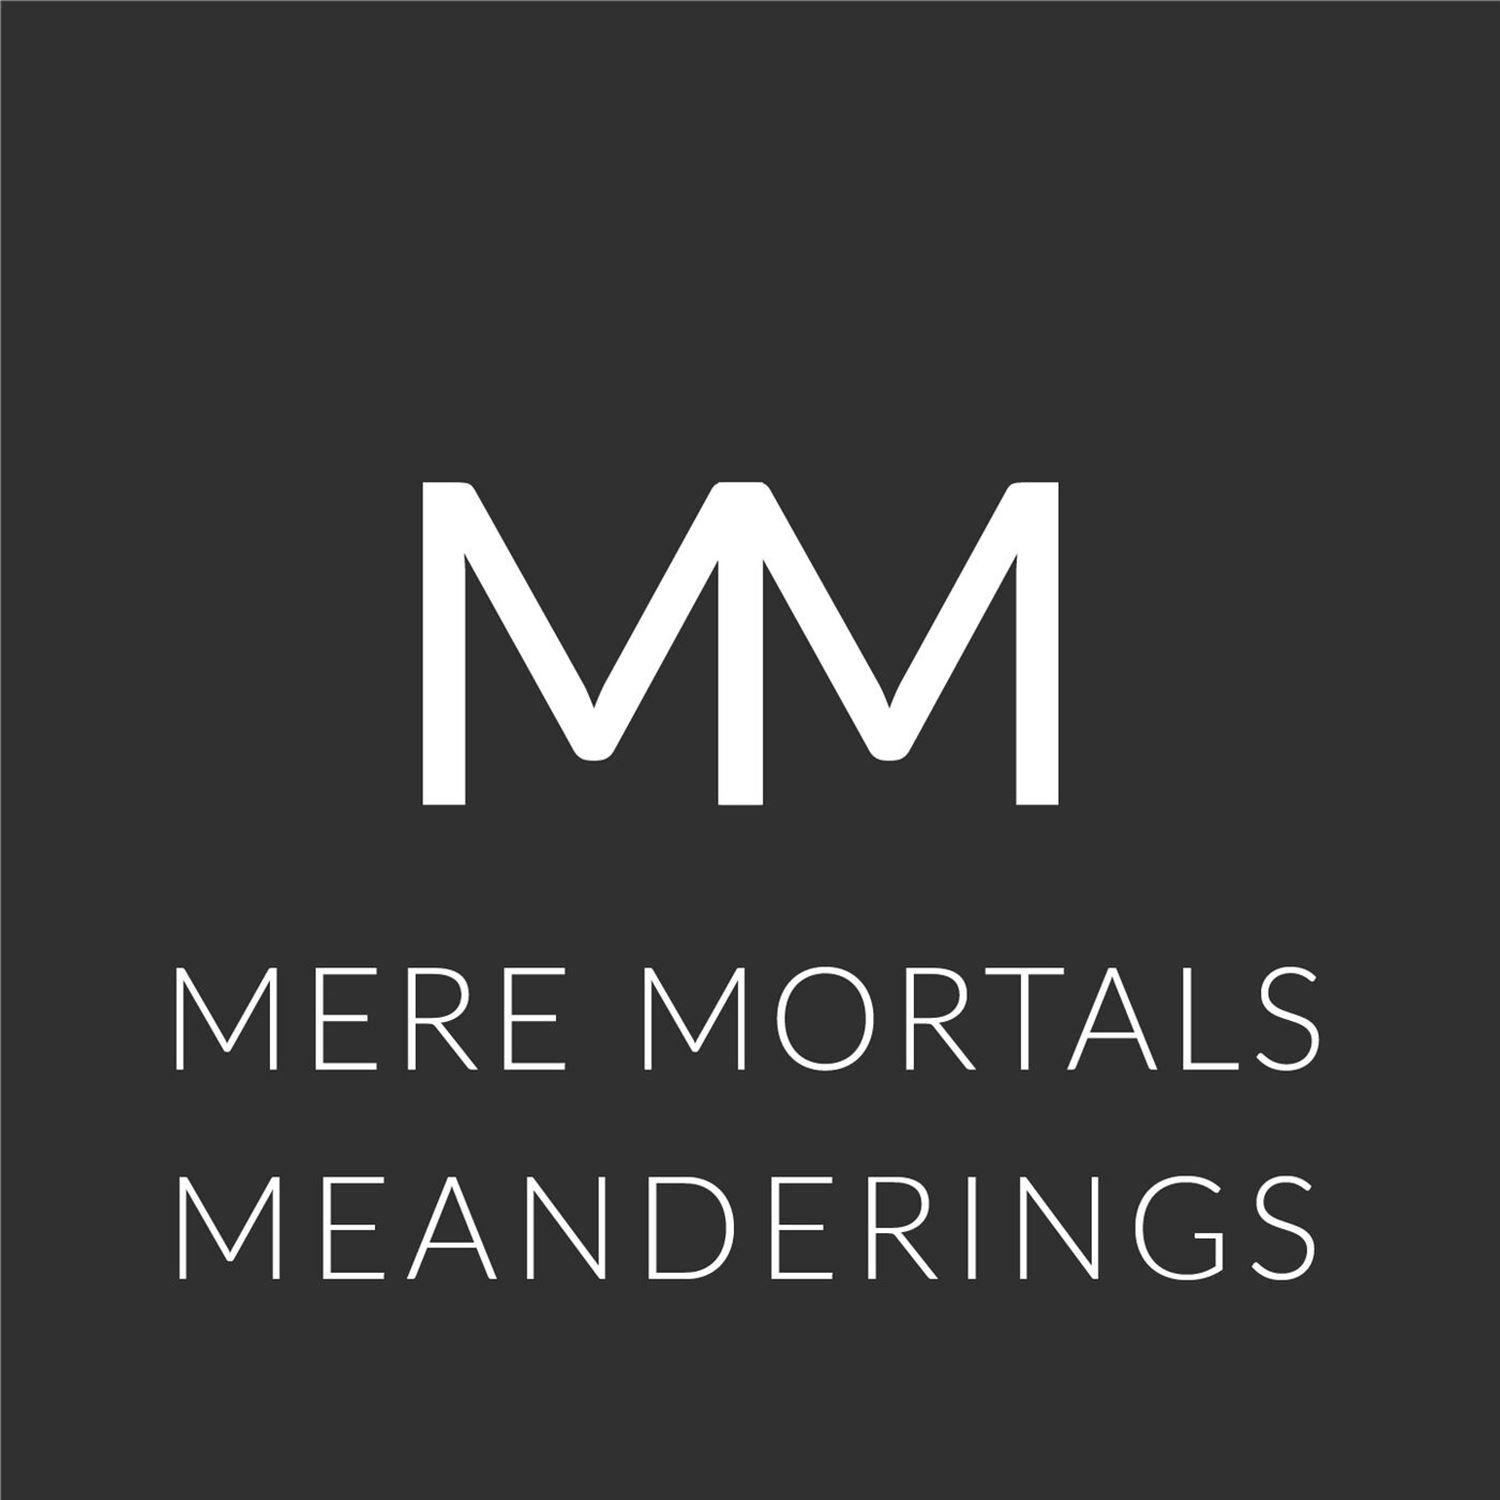 Blacking Out While Freediving (Mere Mortals Episode #76 - Meanderings)